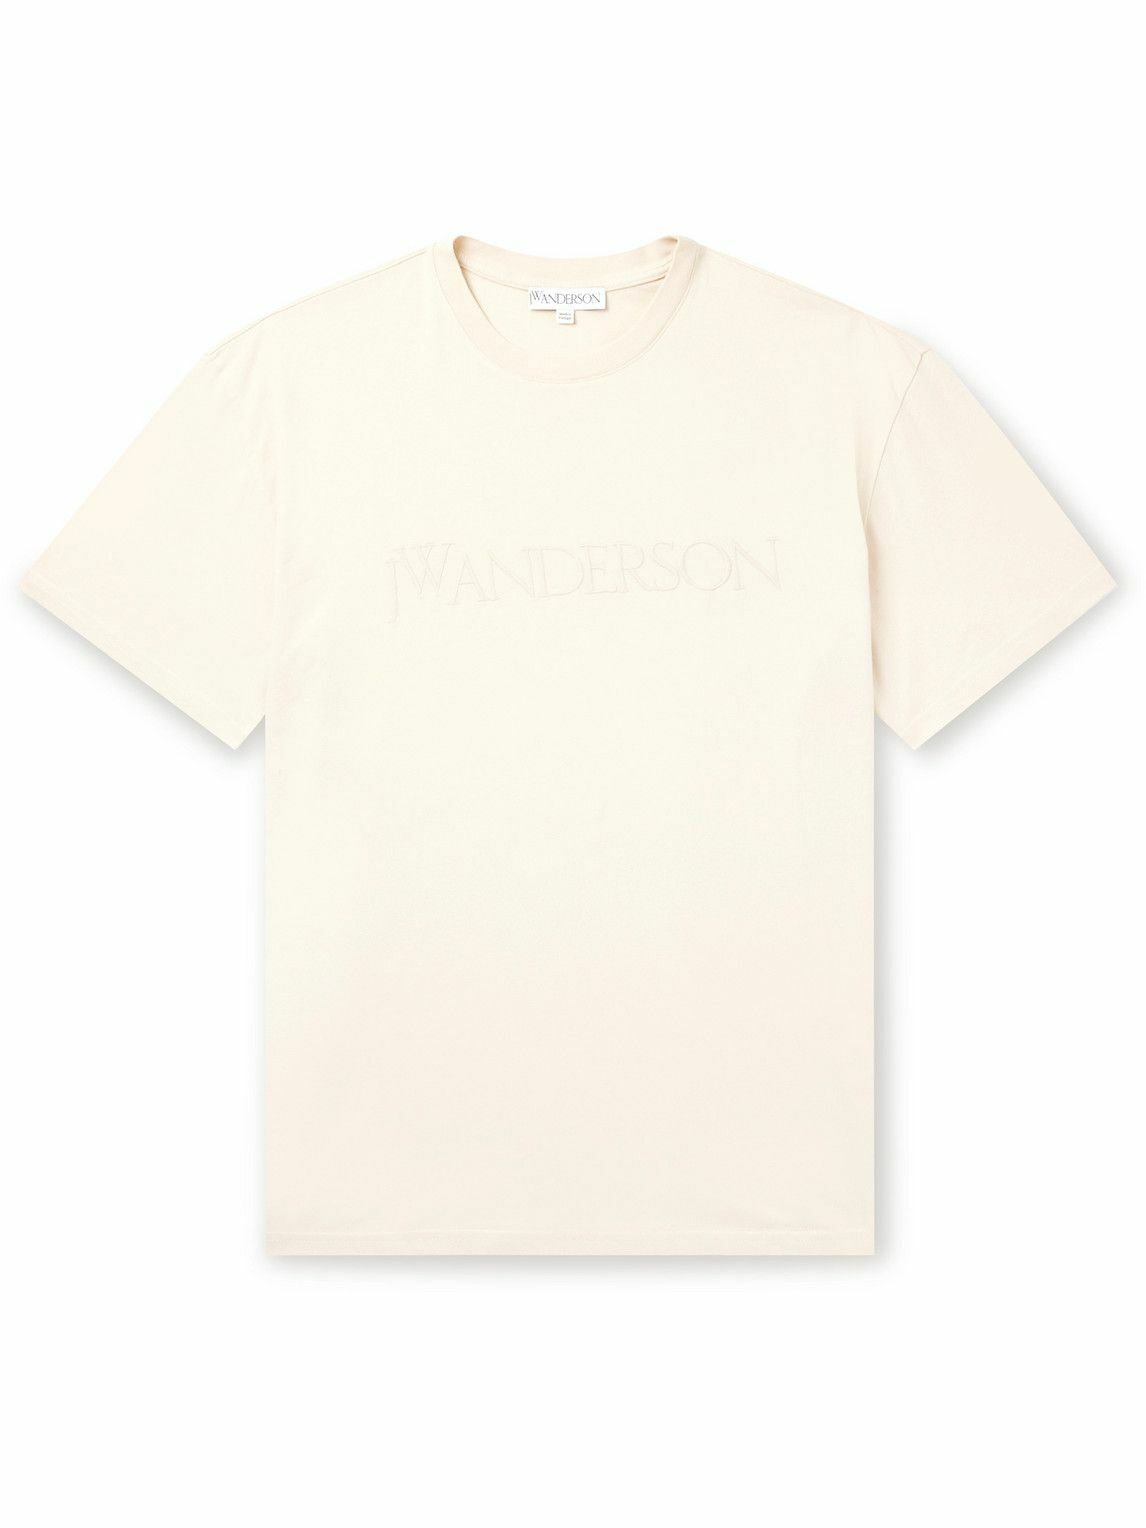 JW Anderson - Logo-Embroidered Cotton-Jersey T-Shirt - Neutrals JW Anderson